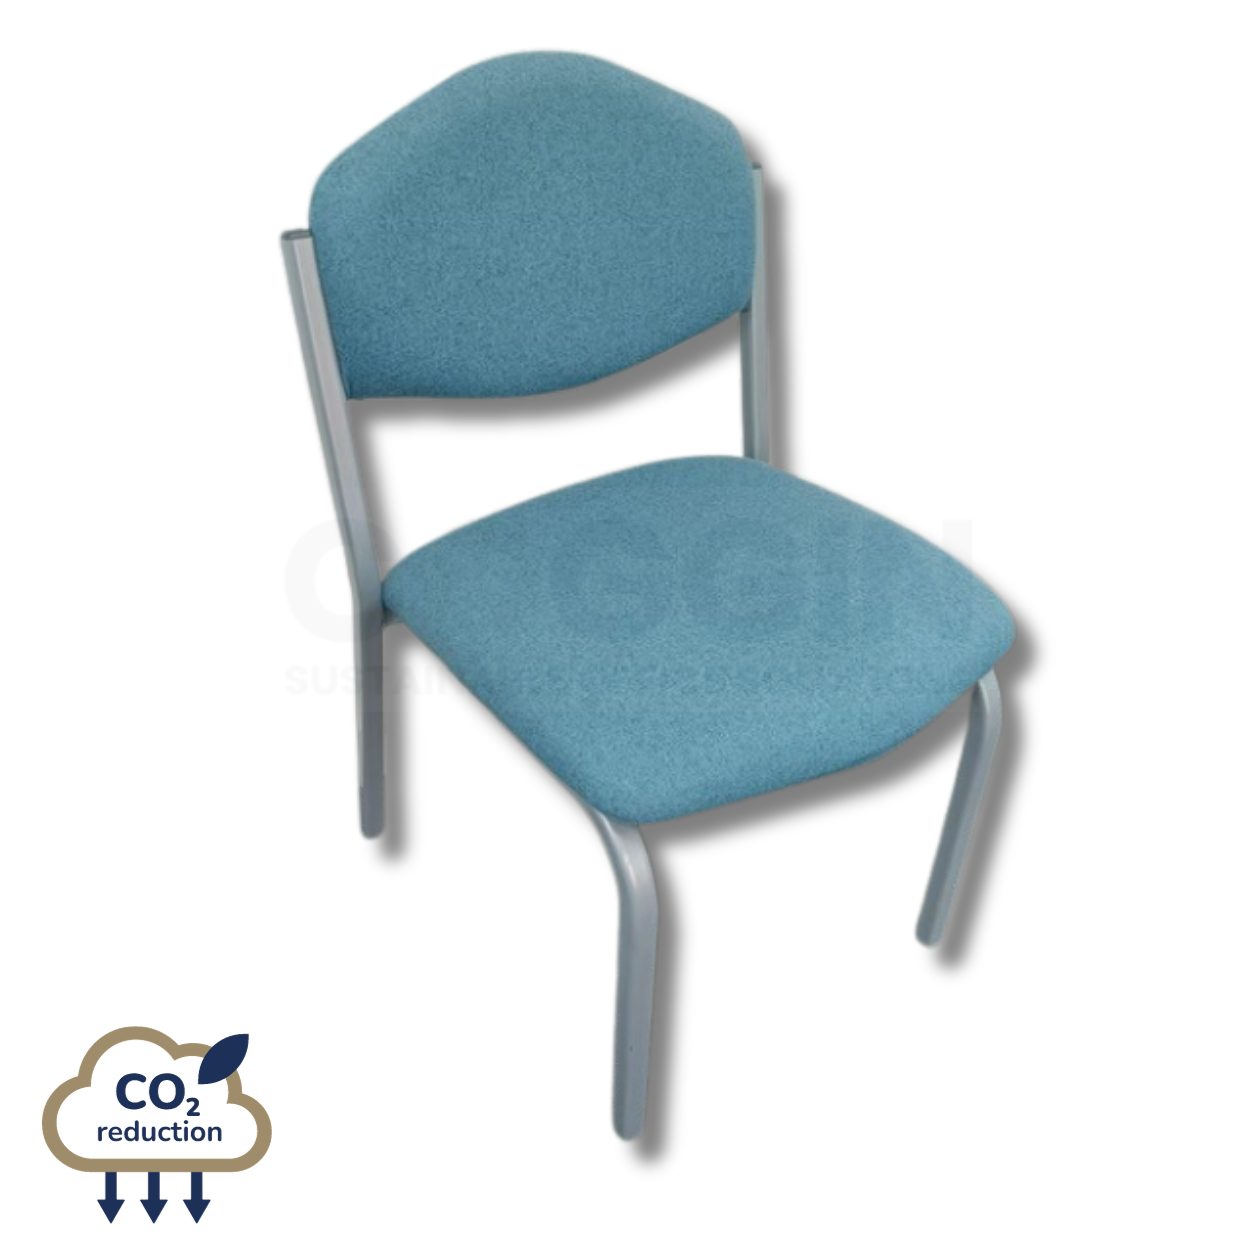 Heavy Duty Stacking Chairs - Sky Blue Fabric - Silver Frame